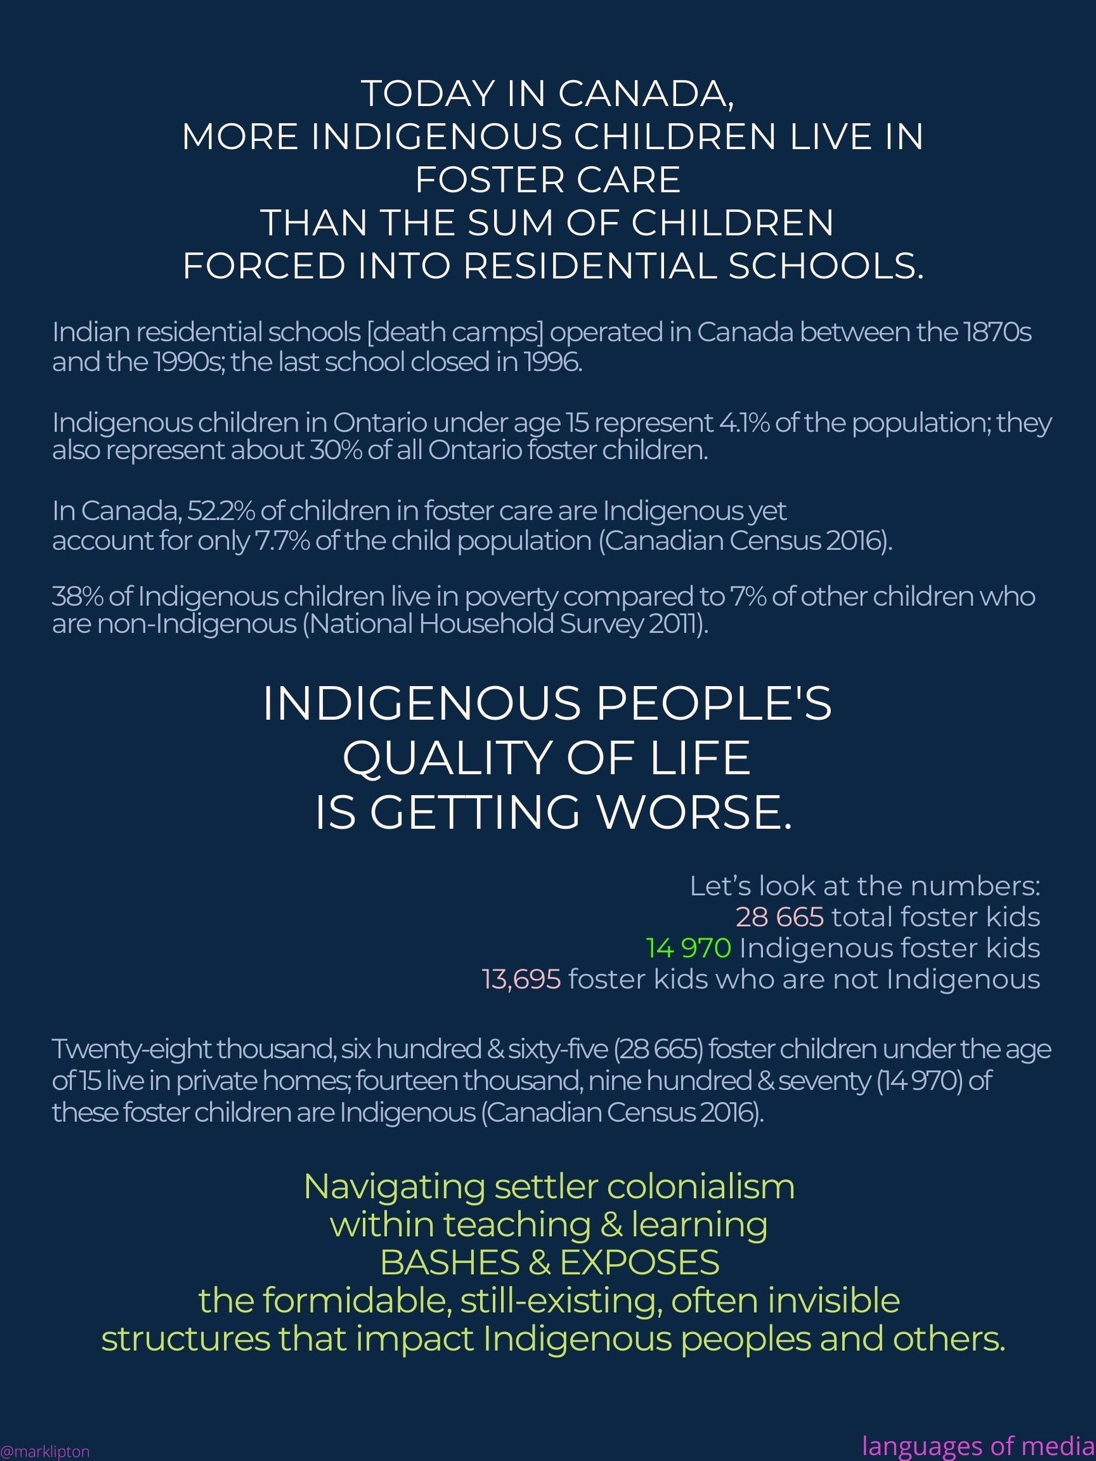 image: Today in Canada, more Indigenous children live in foster care than the sum of children forced into residential schools. Indian residential schools [death camps] operated in Canada between the 1870s and the 1990s; the last school closed in 1996. Indigenous children in Ontario under age 15 represent 4.1% of the population; they also represent about 30% of all Ontario foster children. In Canada, 52.2% of children in foster care are Indigenous yet account for only 7.7% of the child population (Canadian Census 2016). 38% of Indigenous children live in poverty compared to 7% of other children who are non-Indigenous (National Household Survey 2011).